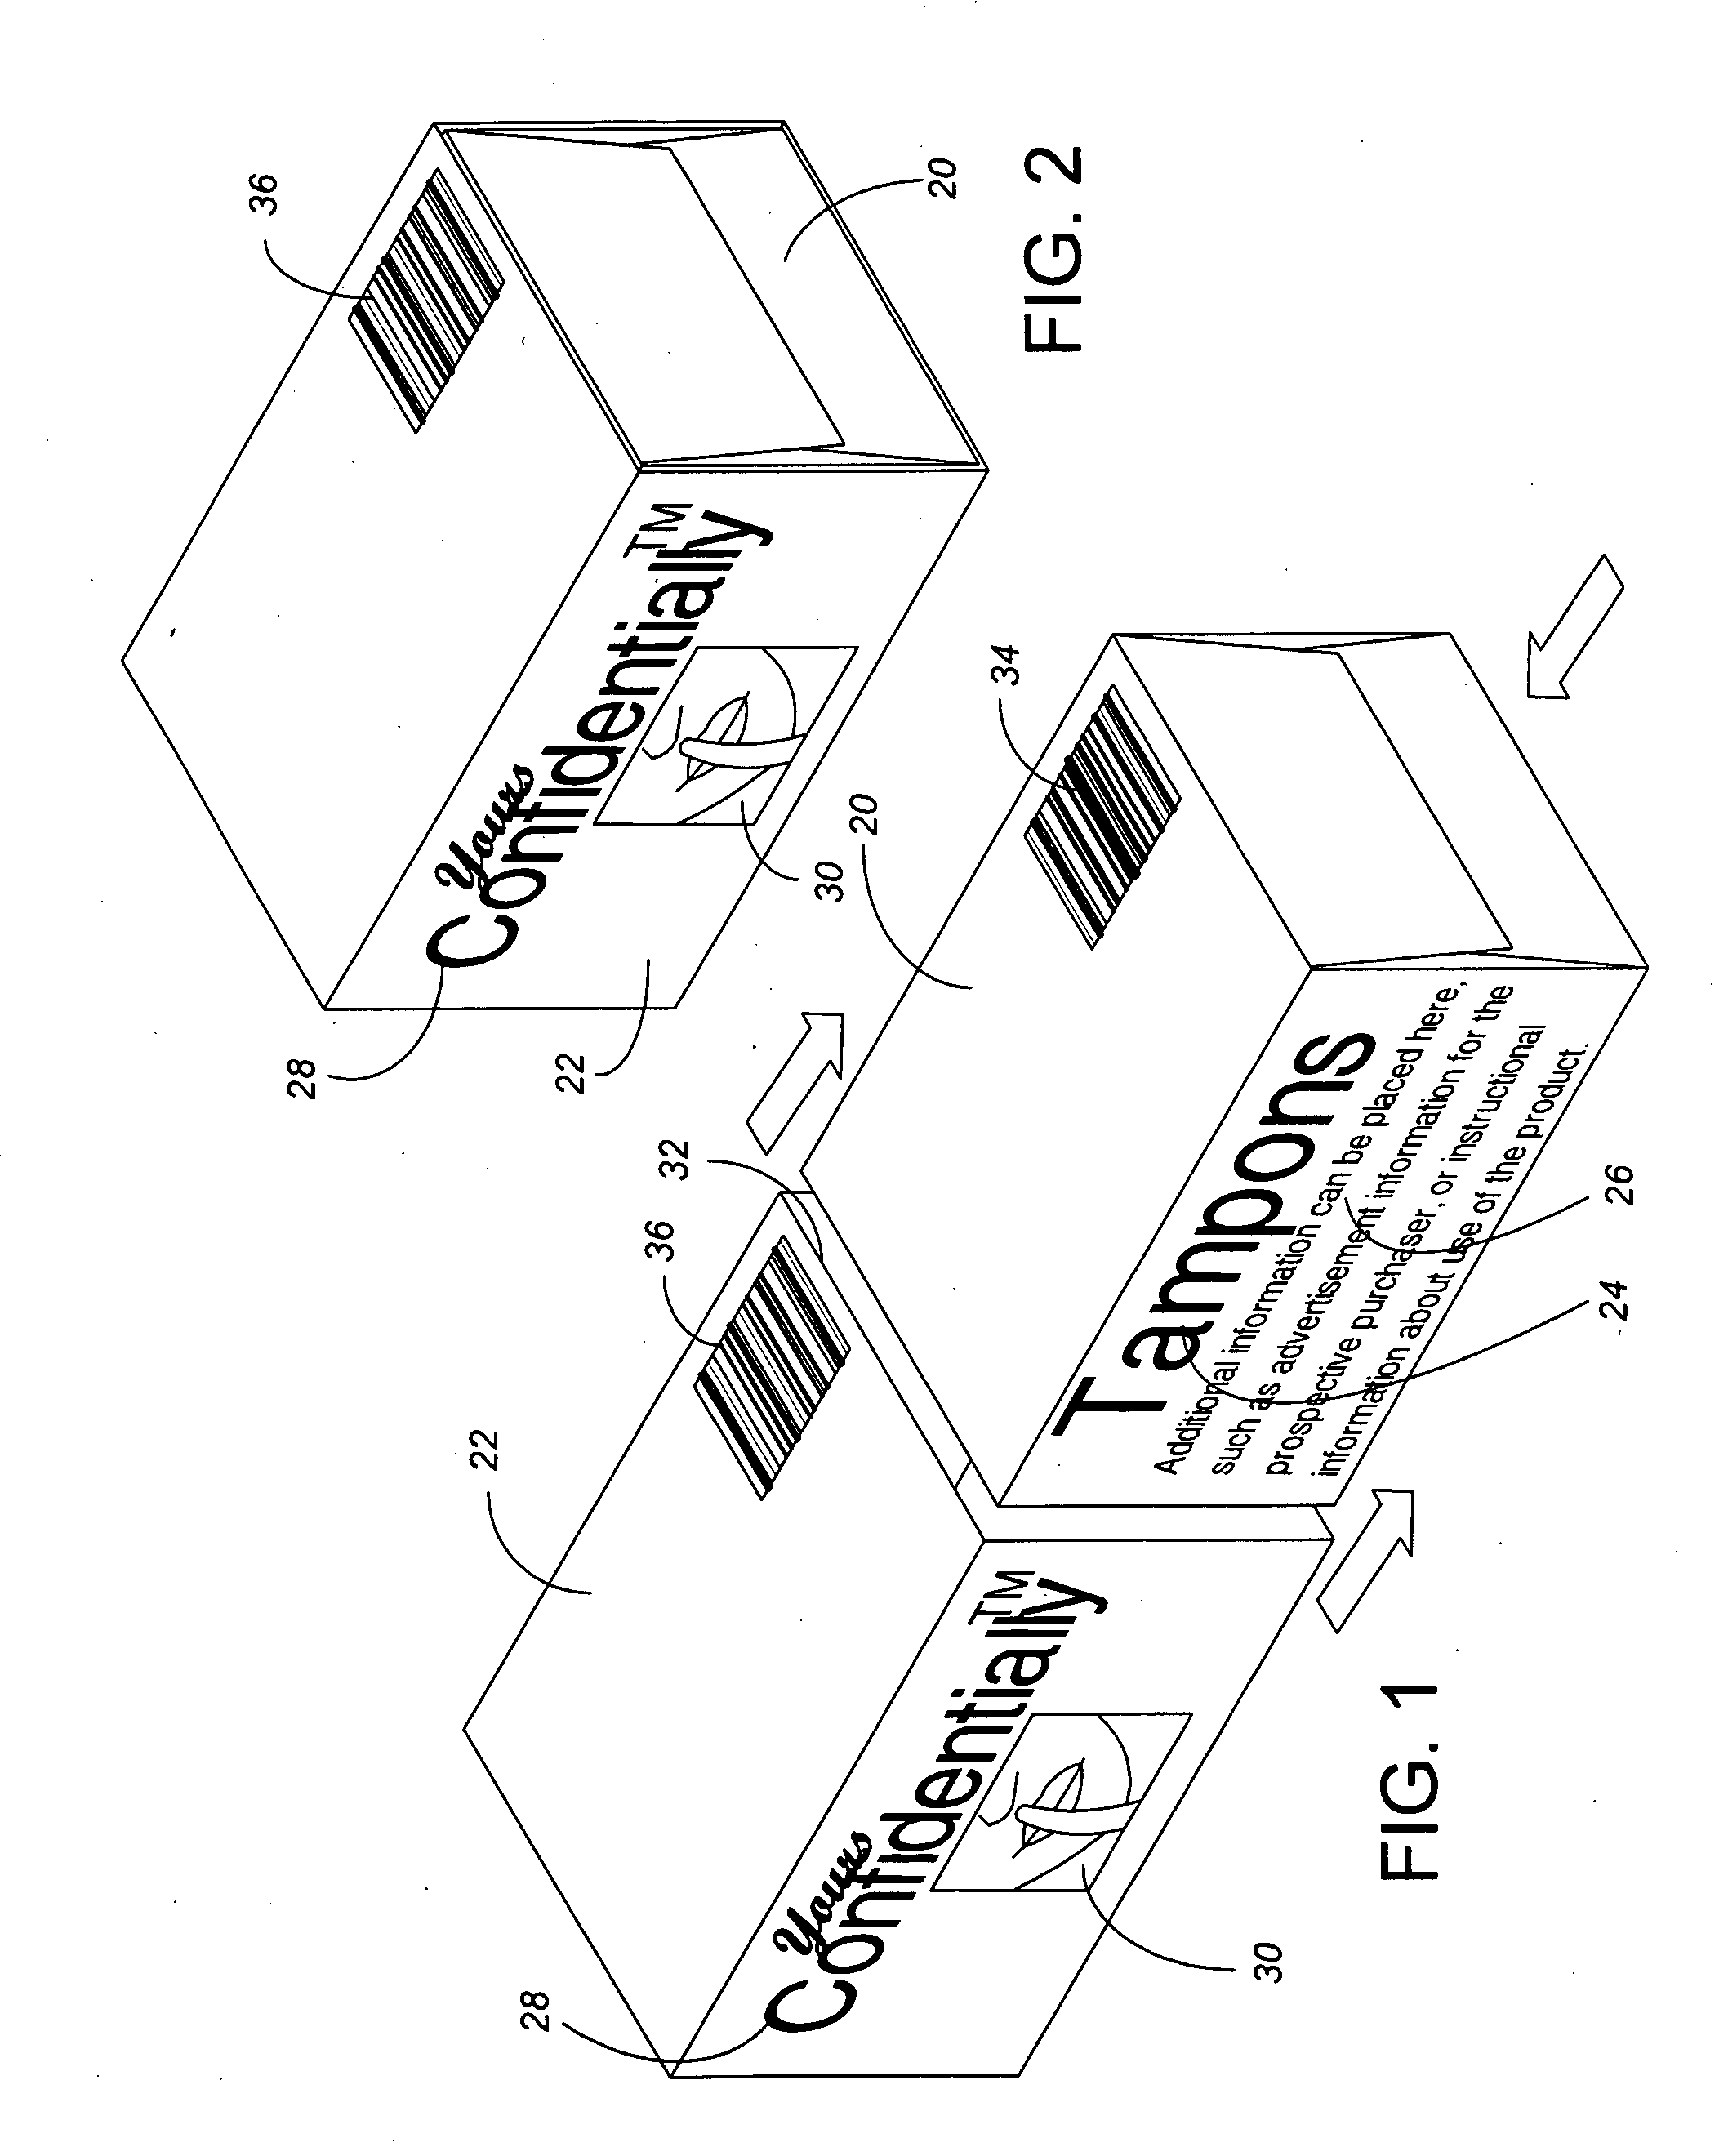 Confidentiality Packaging System